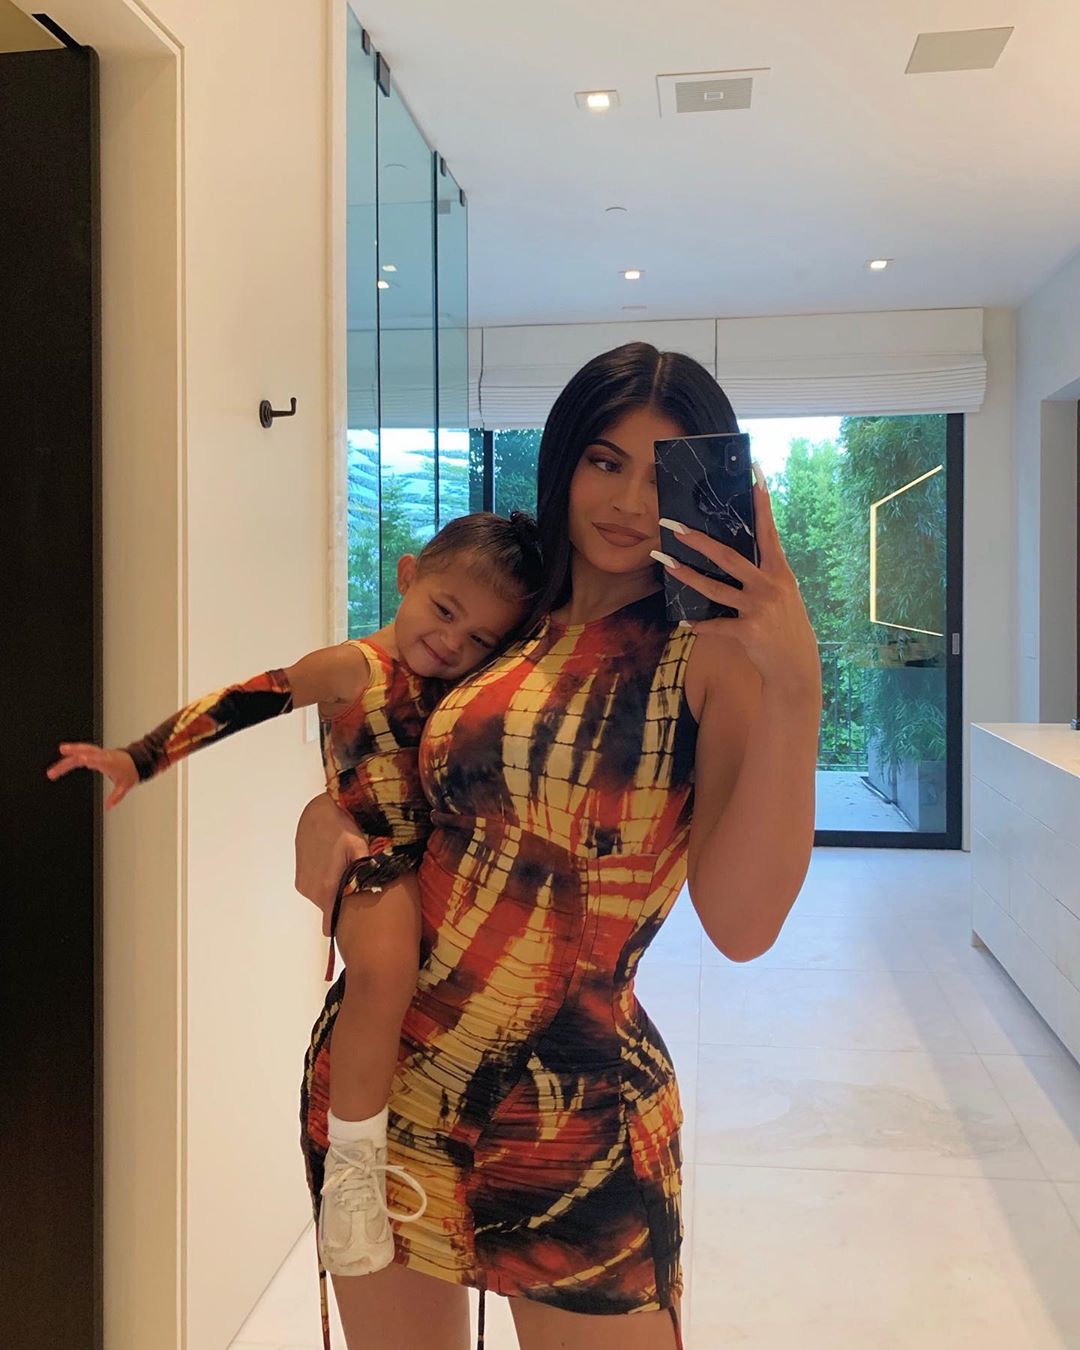 Kylie Jenner Gifts Daughter Stormi a 'Big Girl' Swing Set on Instagram